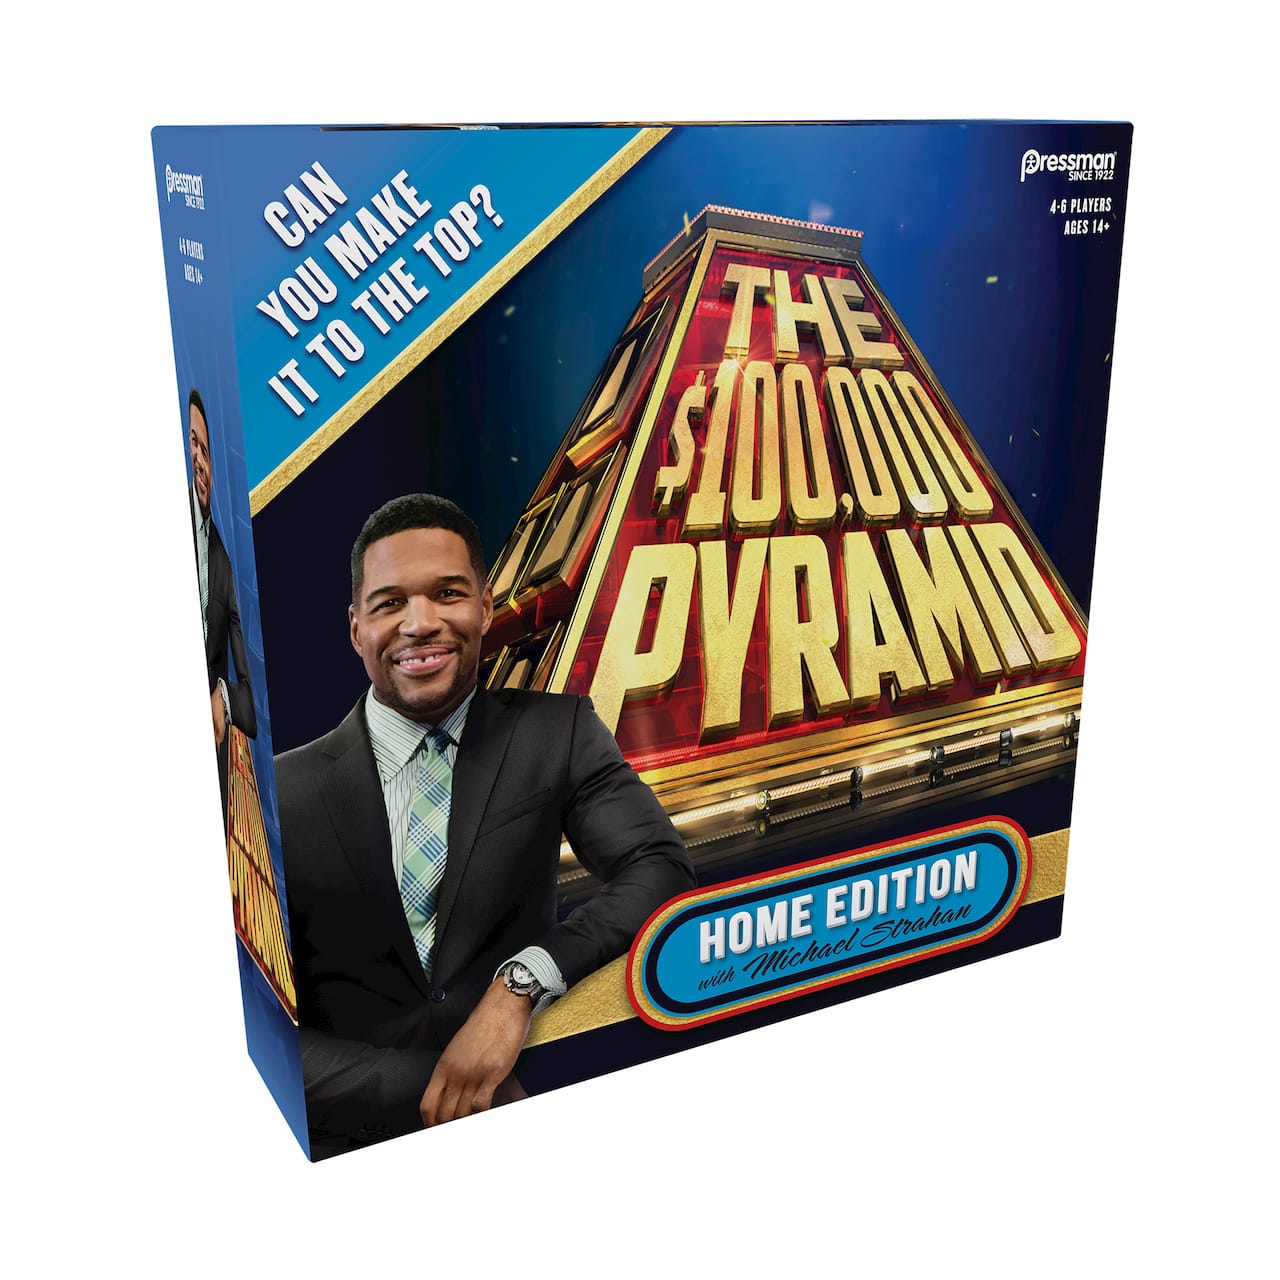 The $100,000 Pyramid Home Edition with Michael Strahan